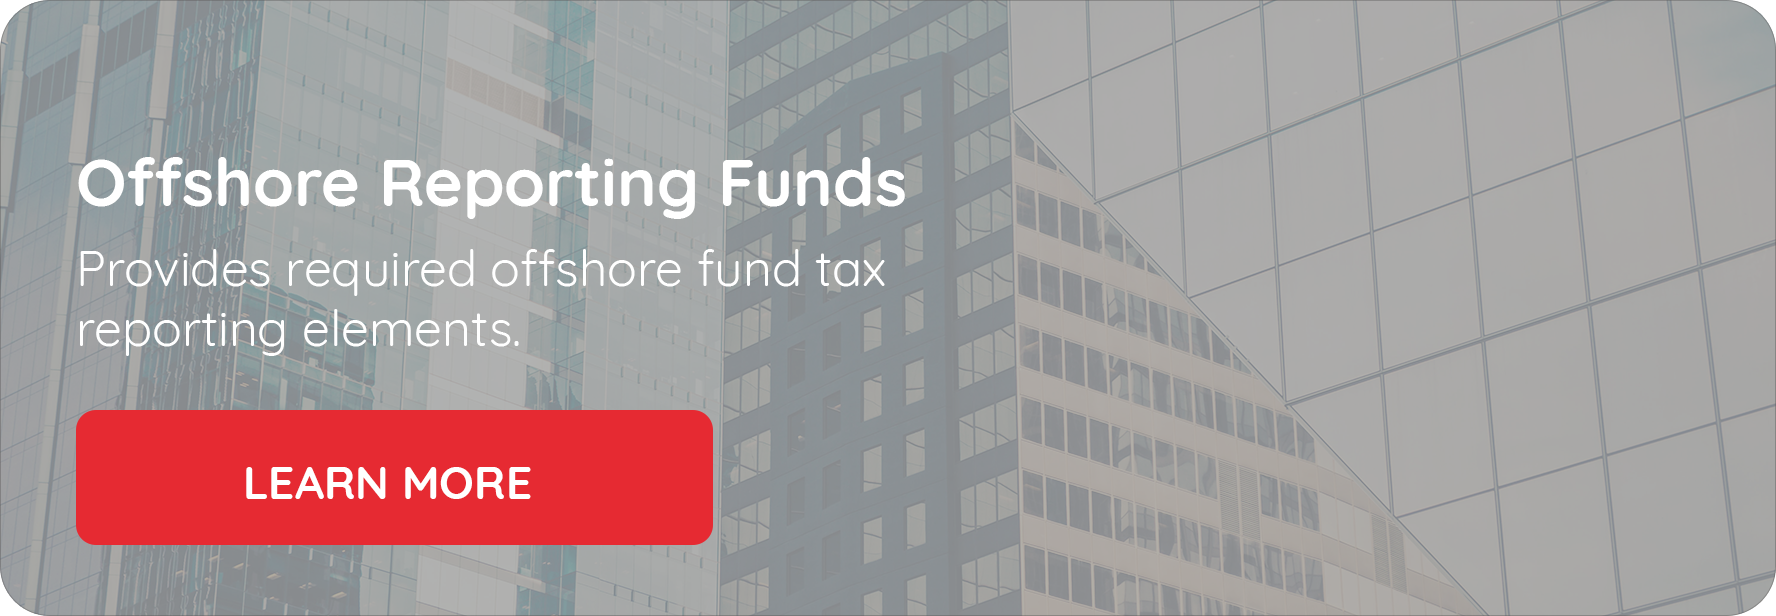 CTA Insert - Offshore Reporting Funds